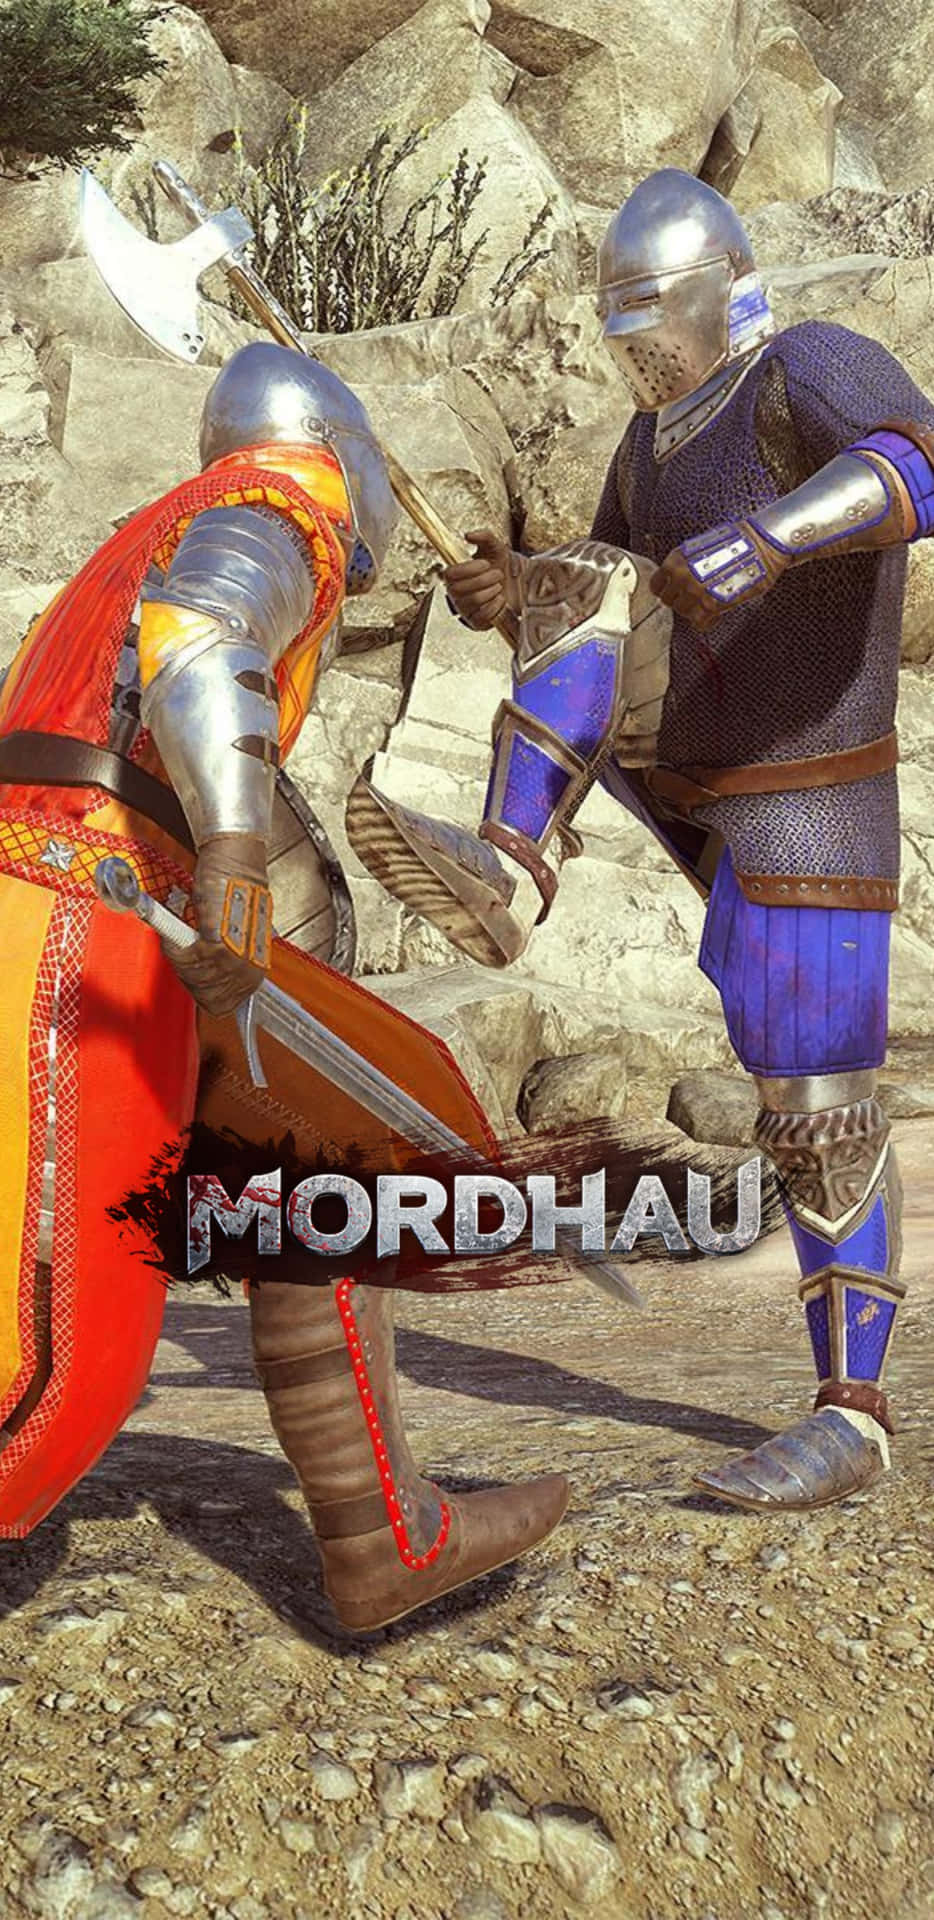 Pixel 3XL and Mordhau, the ultimate gaming combo